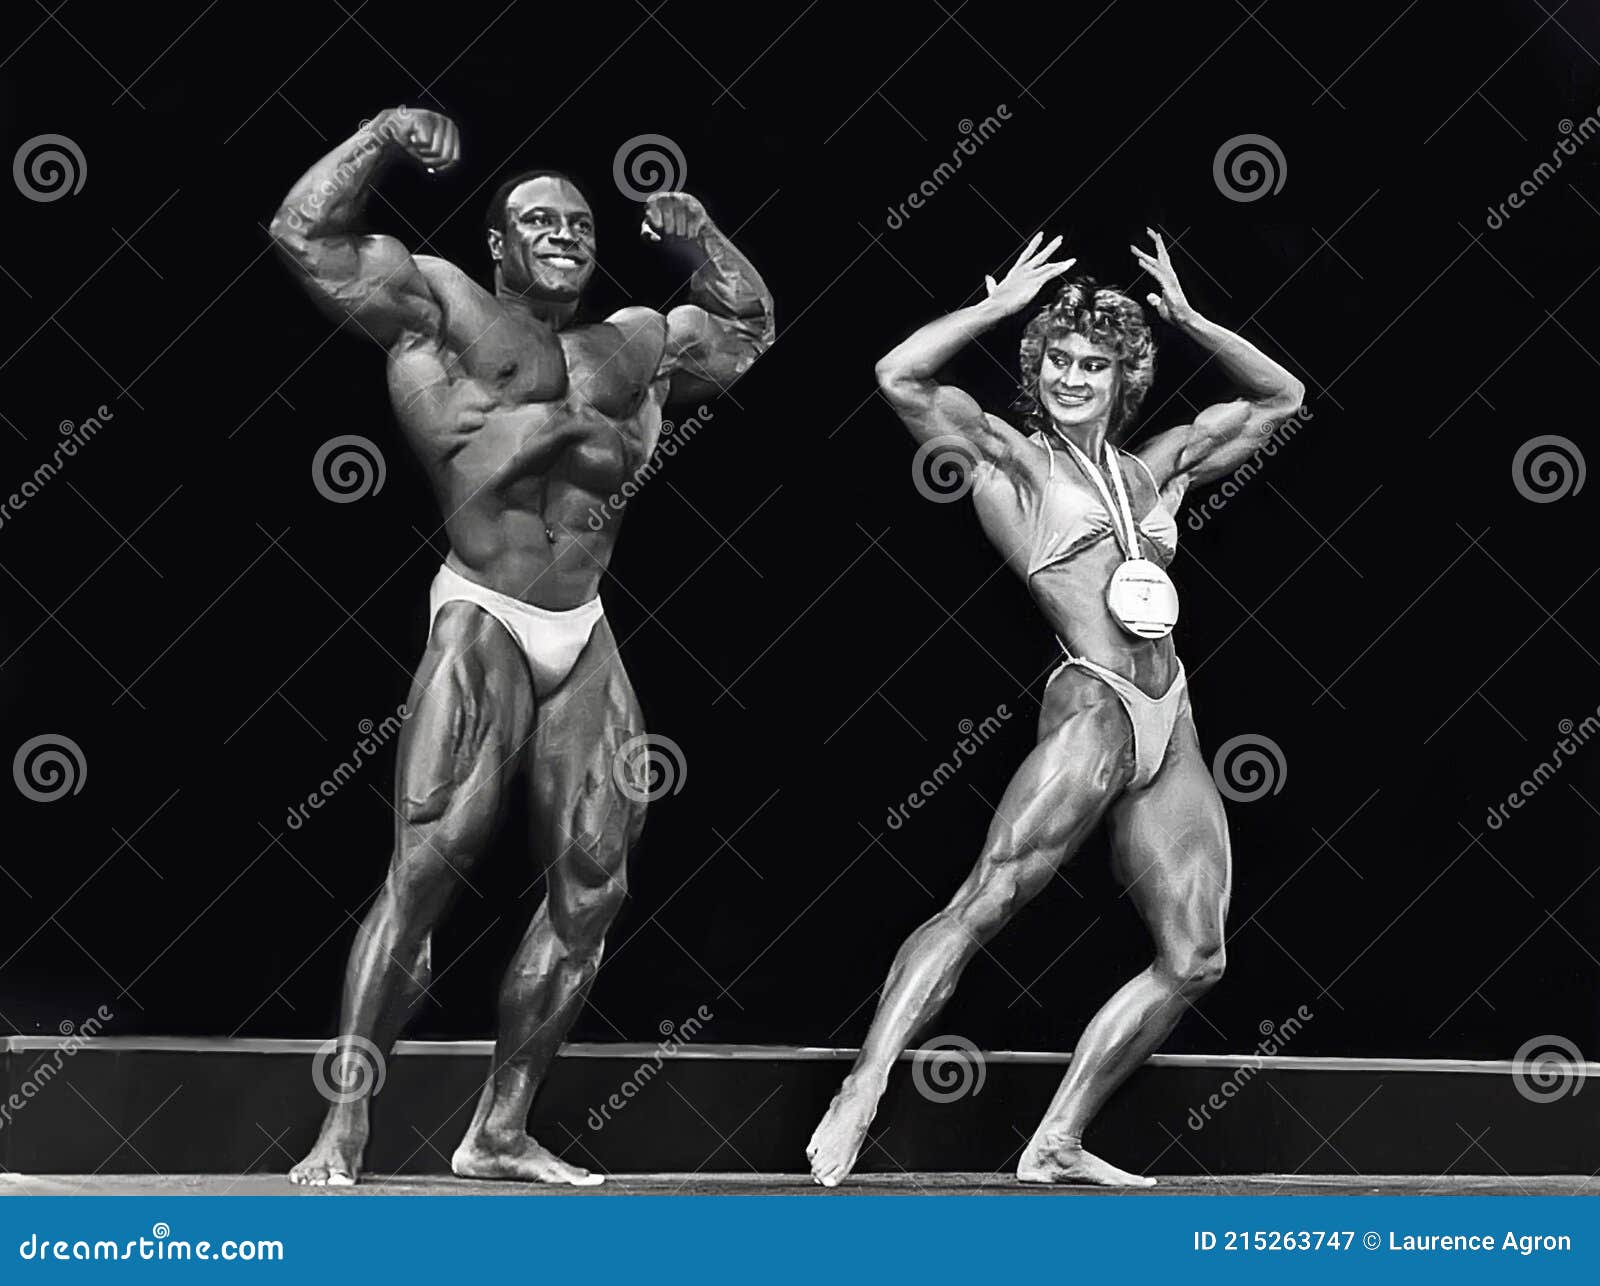 The World Will Never See Anything Like This”: Ronnie Coleman's Olympia  Physique From 1999 Breaks the Internet - EssentiallySports